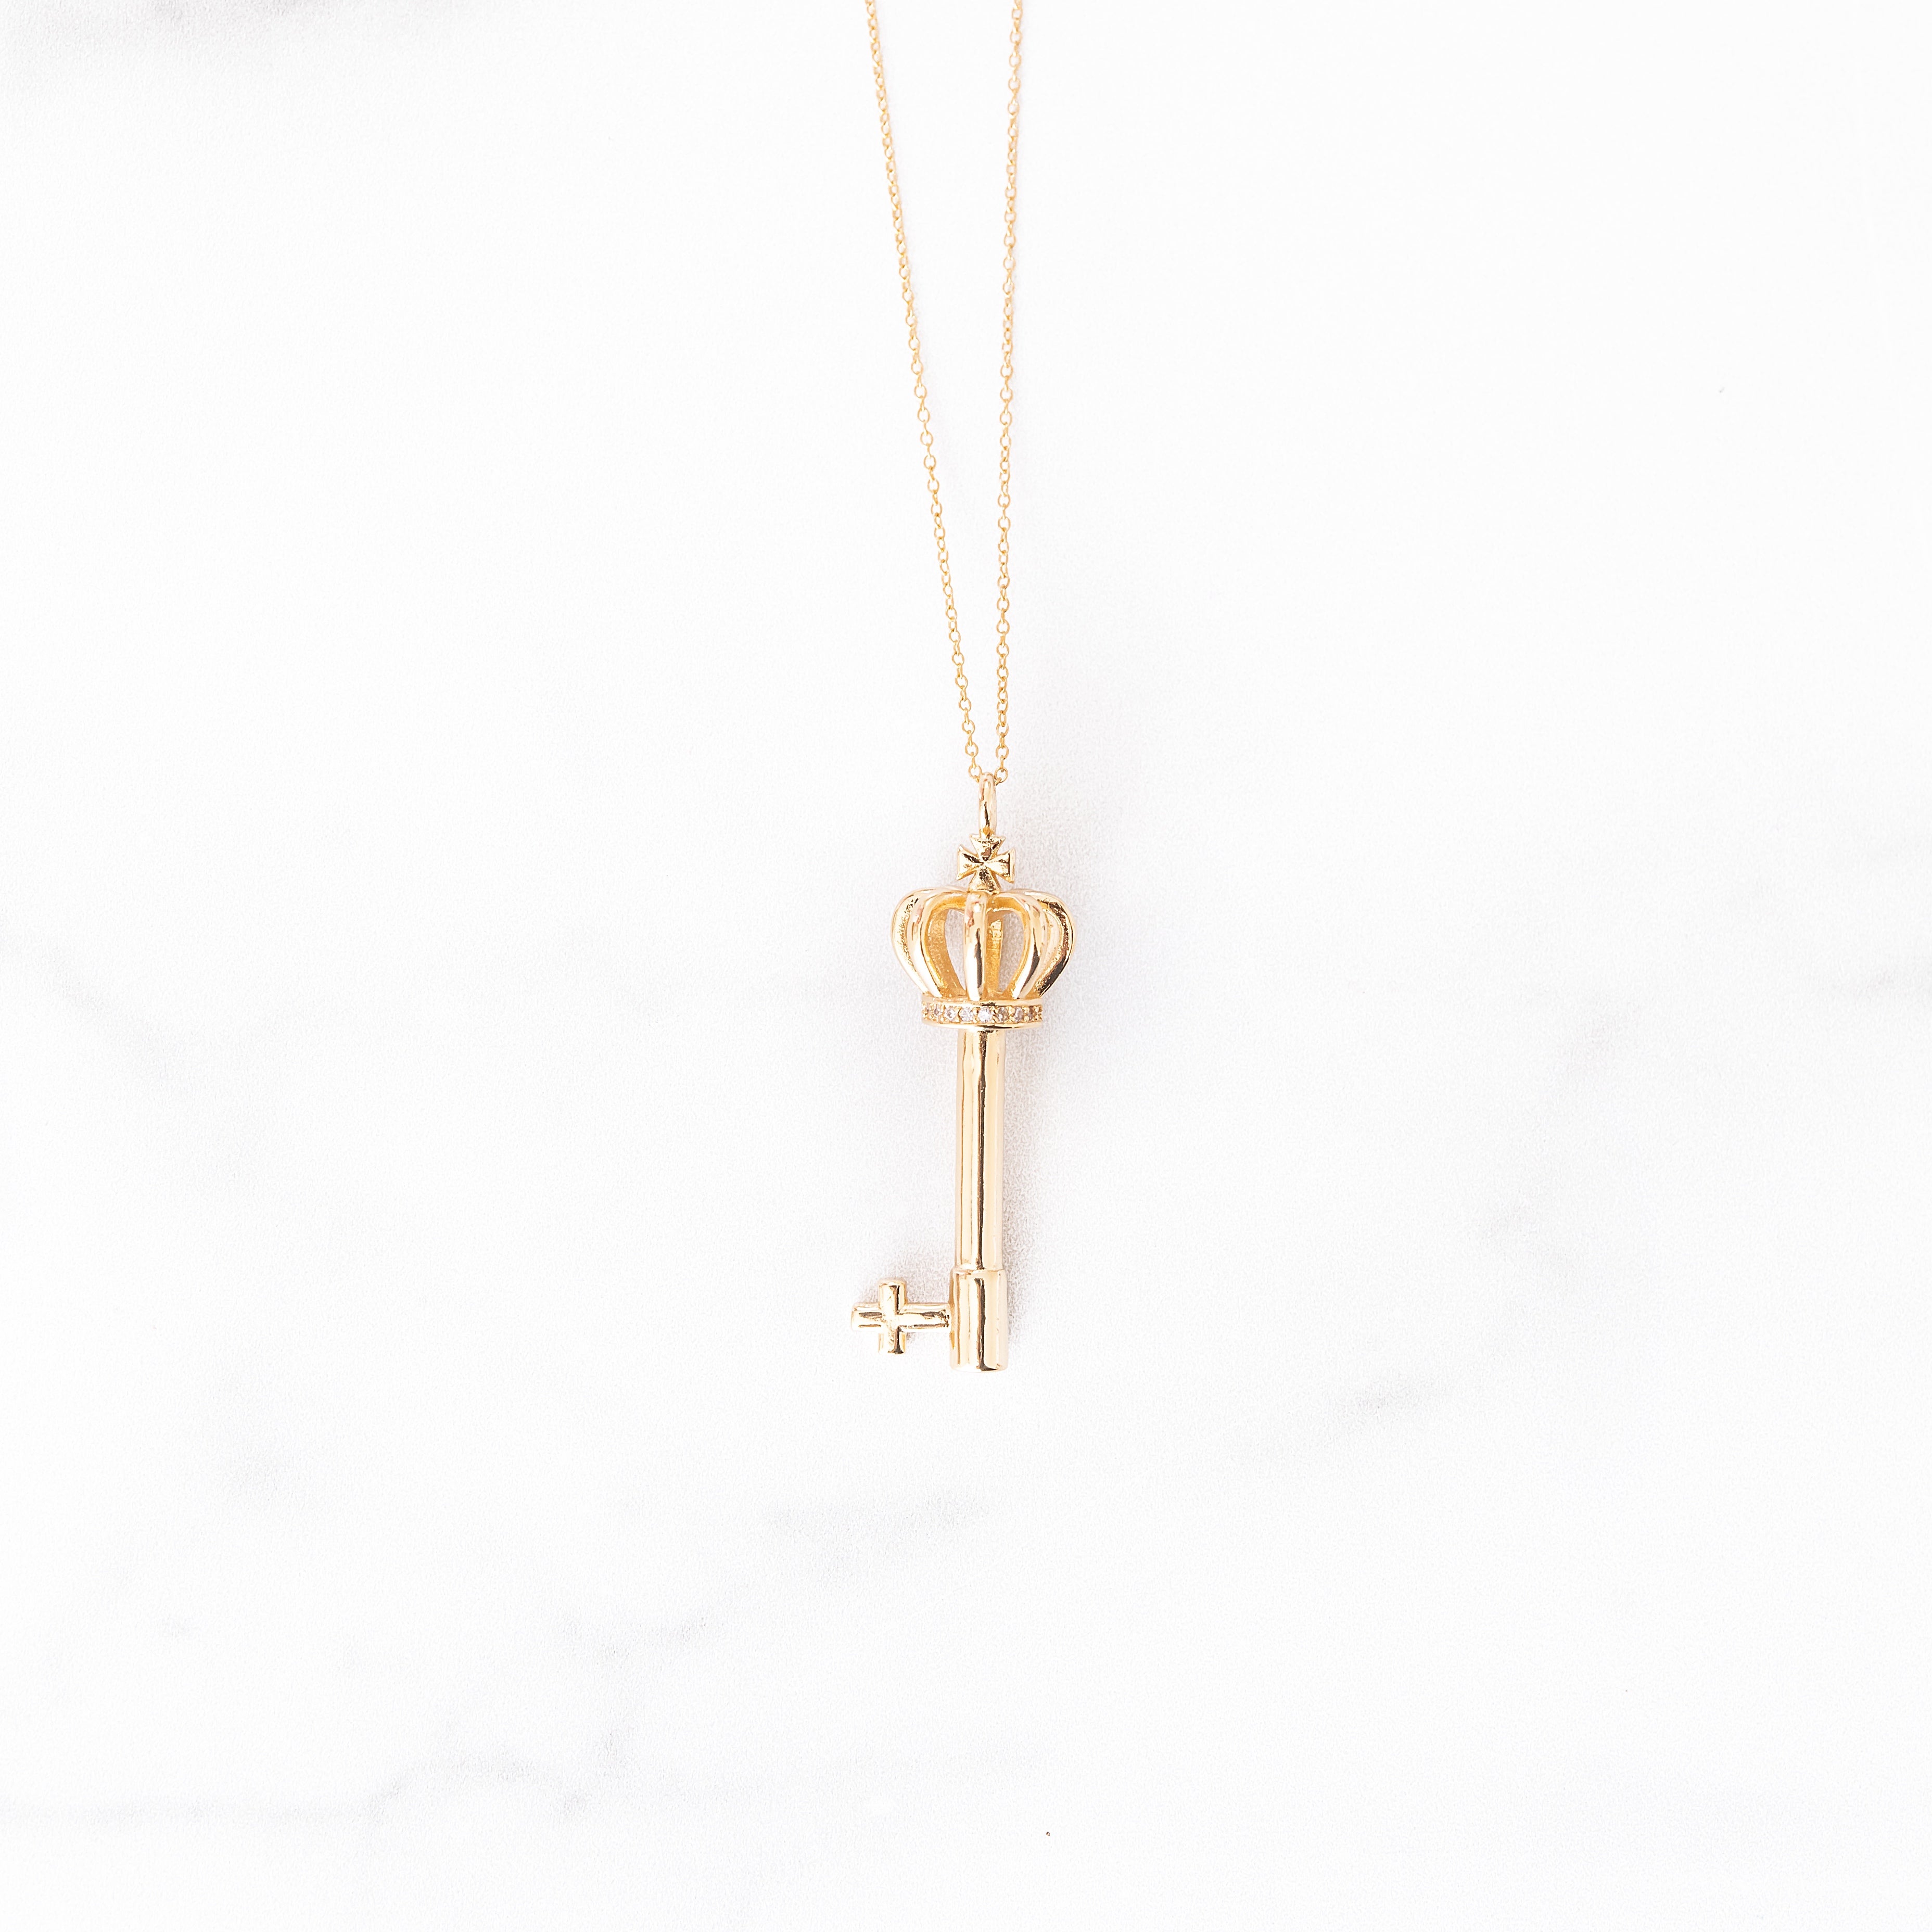 The Freedom Key Necklace